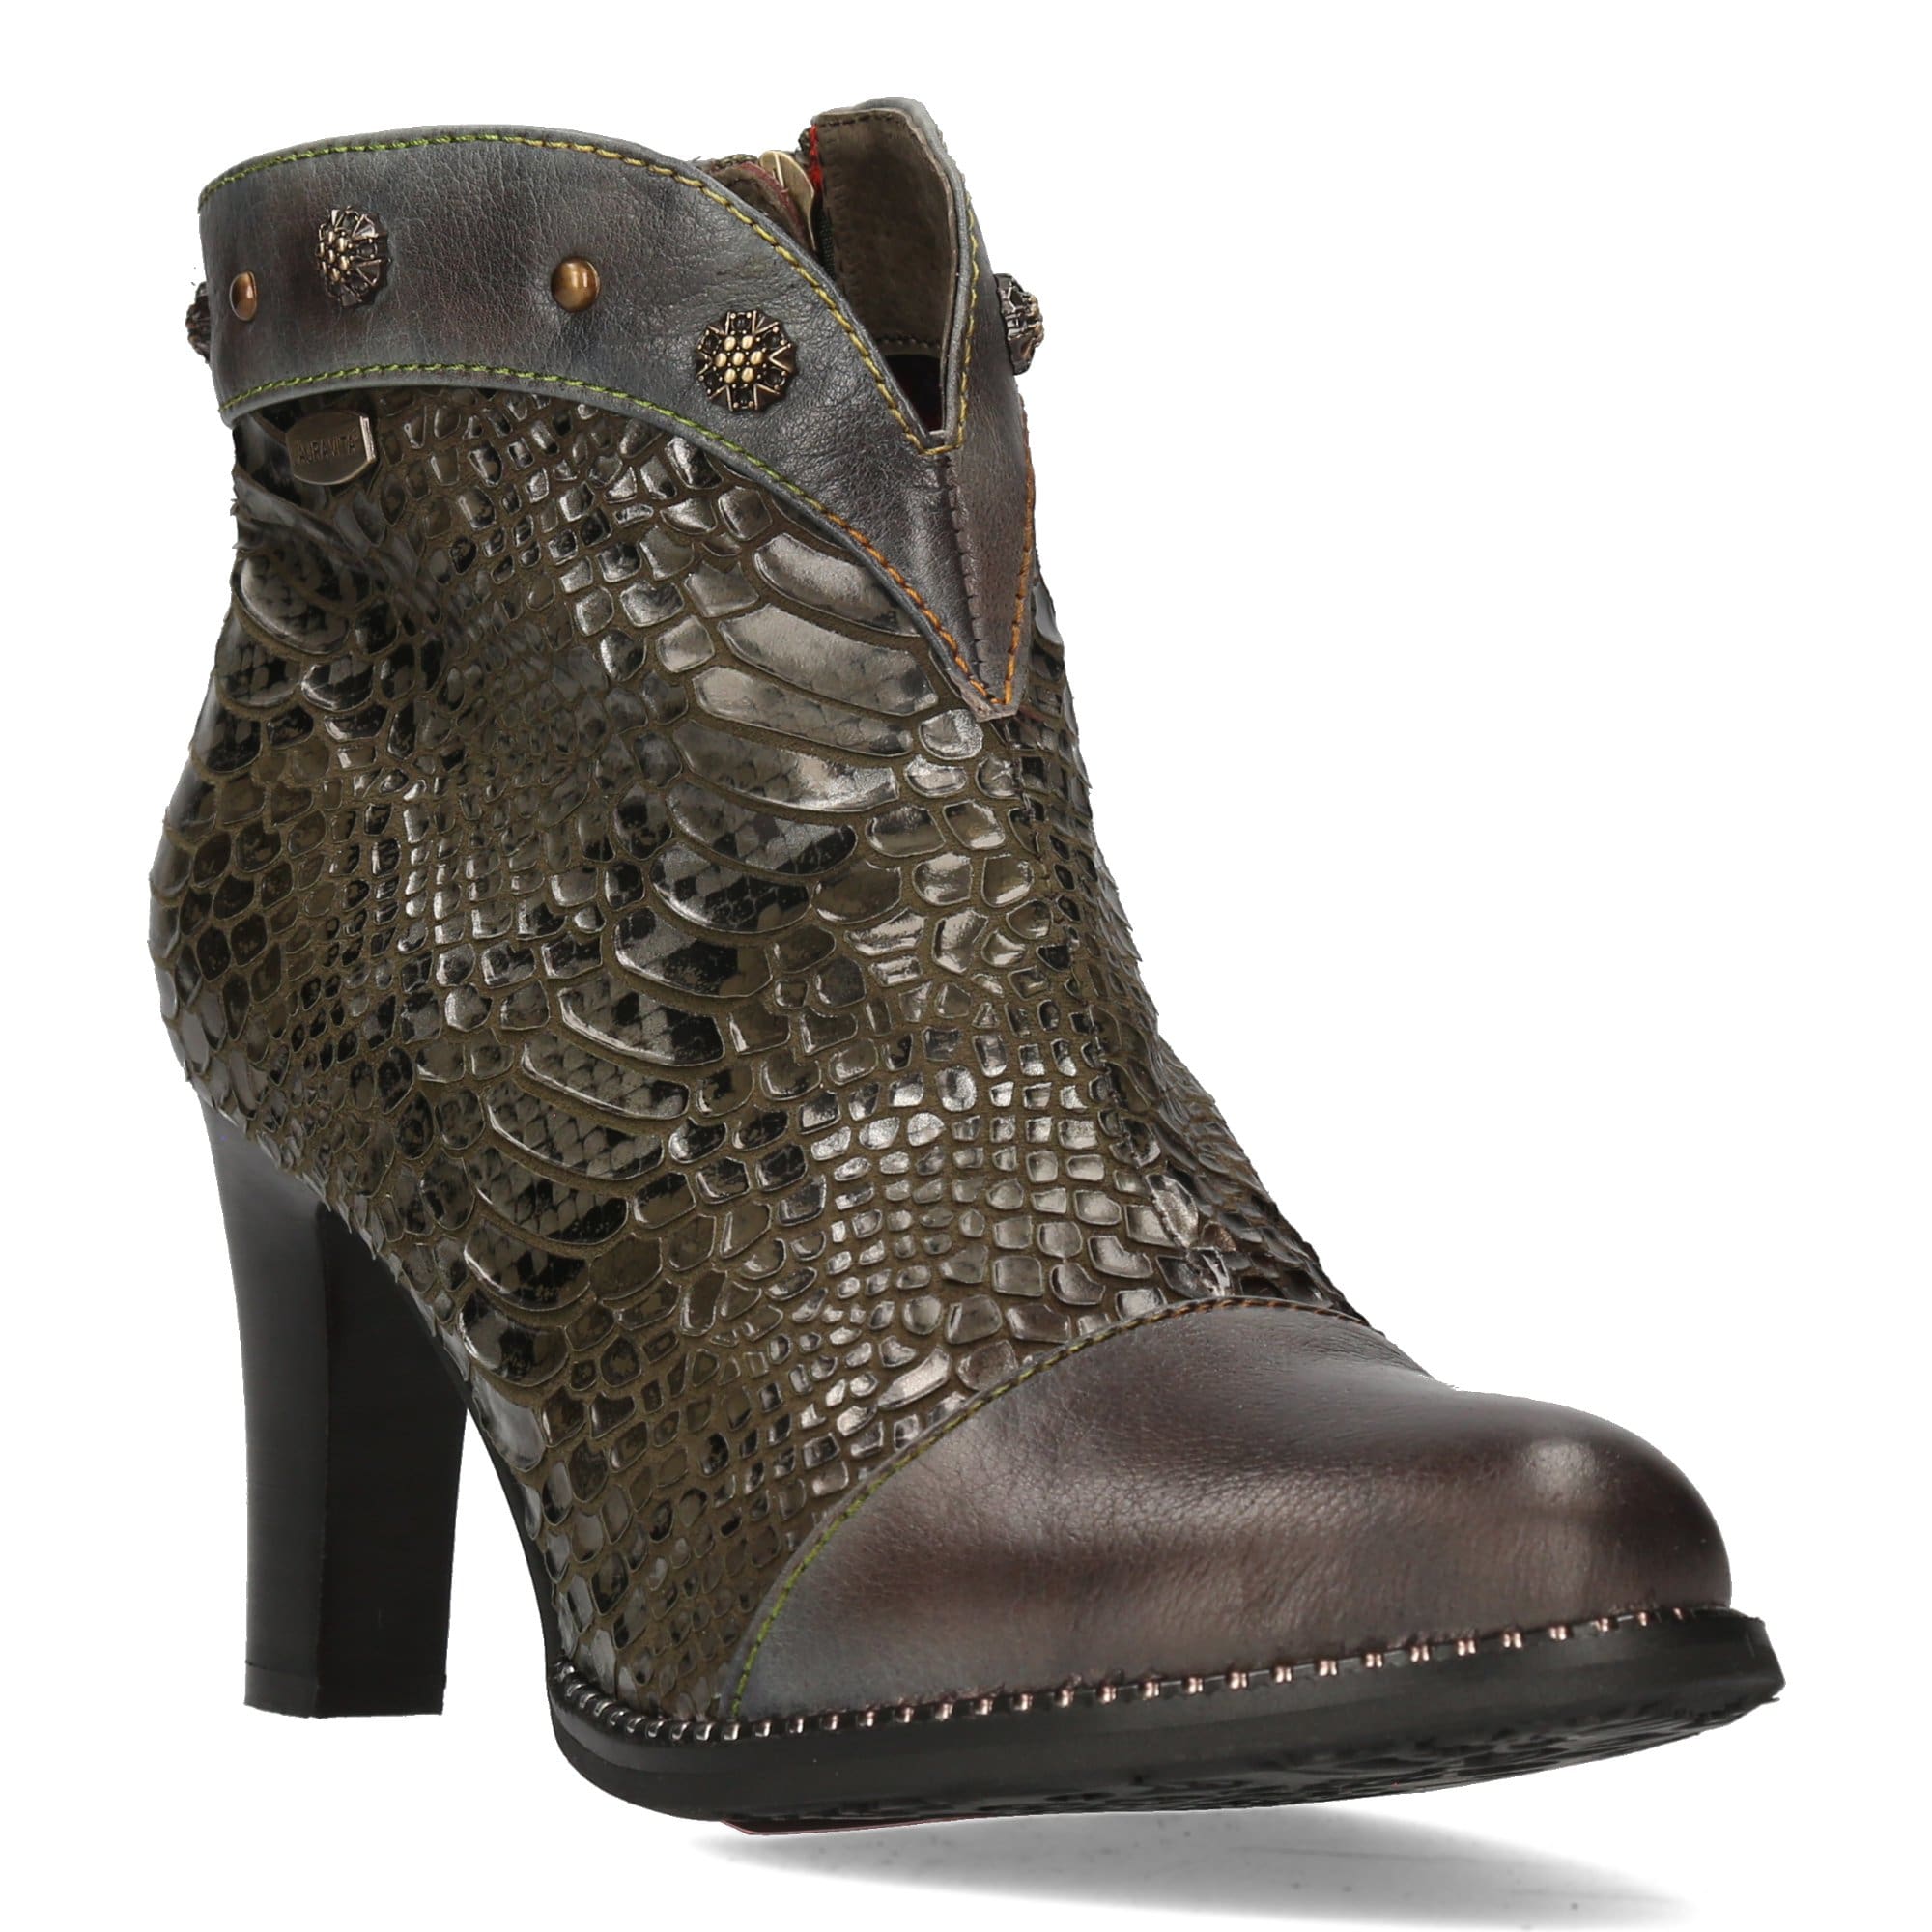 Schuh ALBANE 0383 - Boots